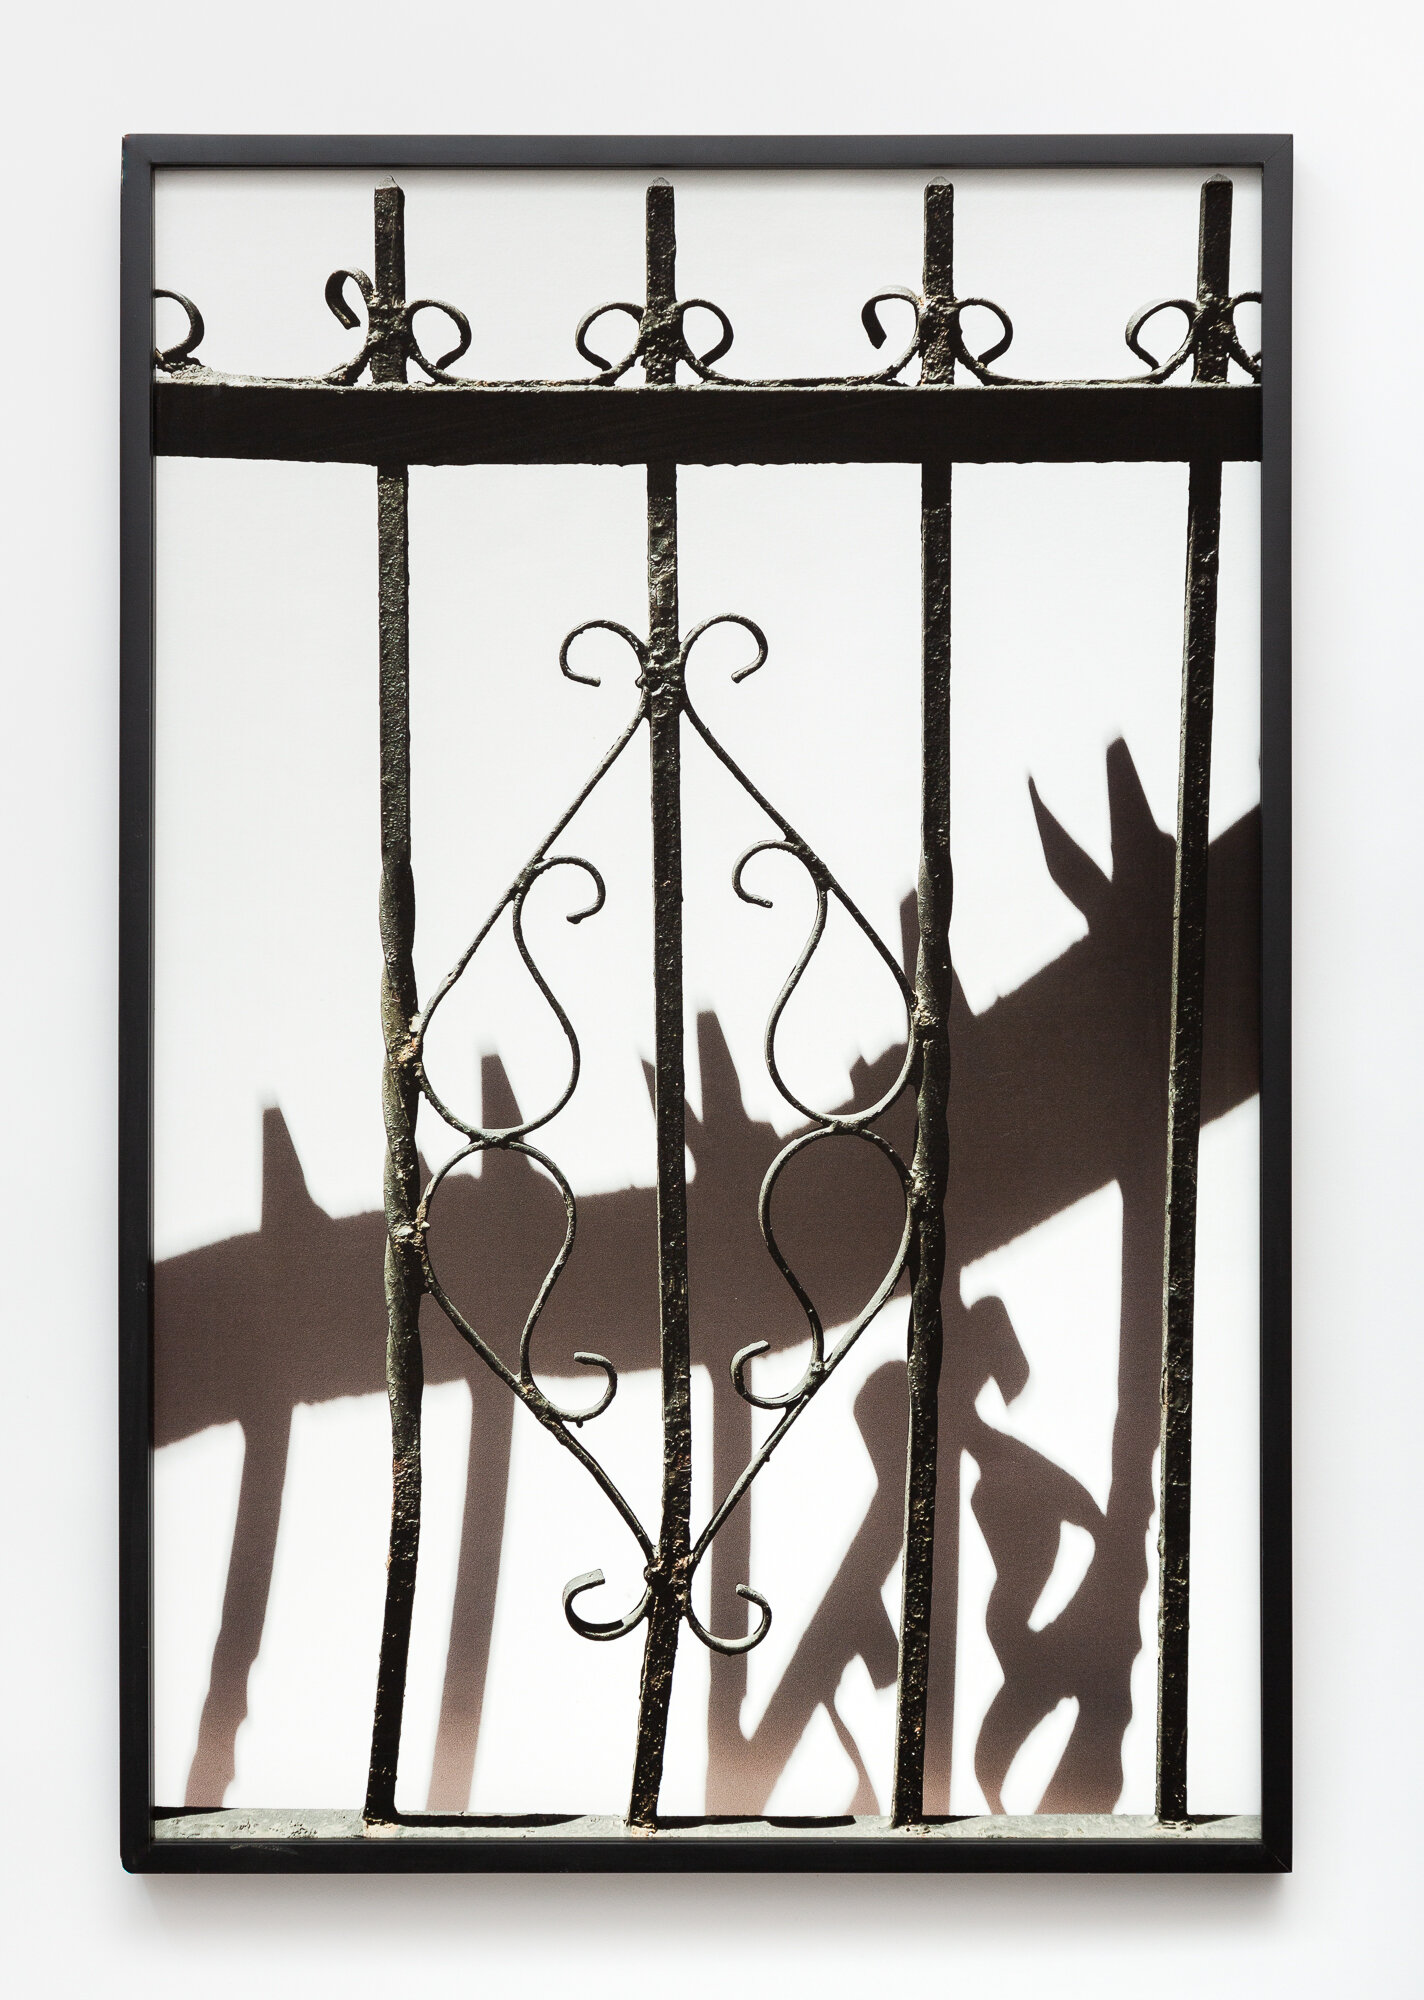  Untitled (Bed-Stuy Gates), 2016, Pigment print, 24.5 x 16.5 inches (framed) 